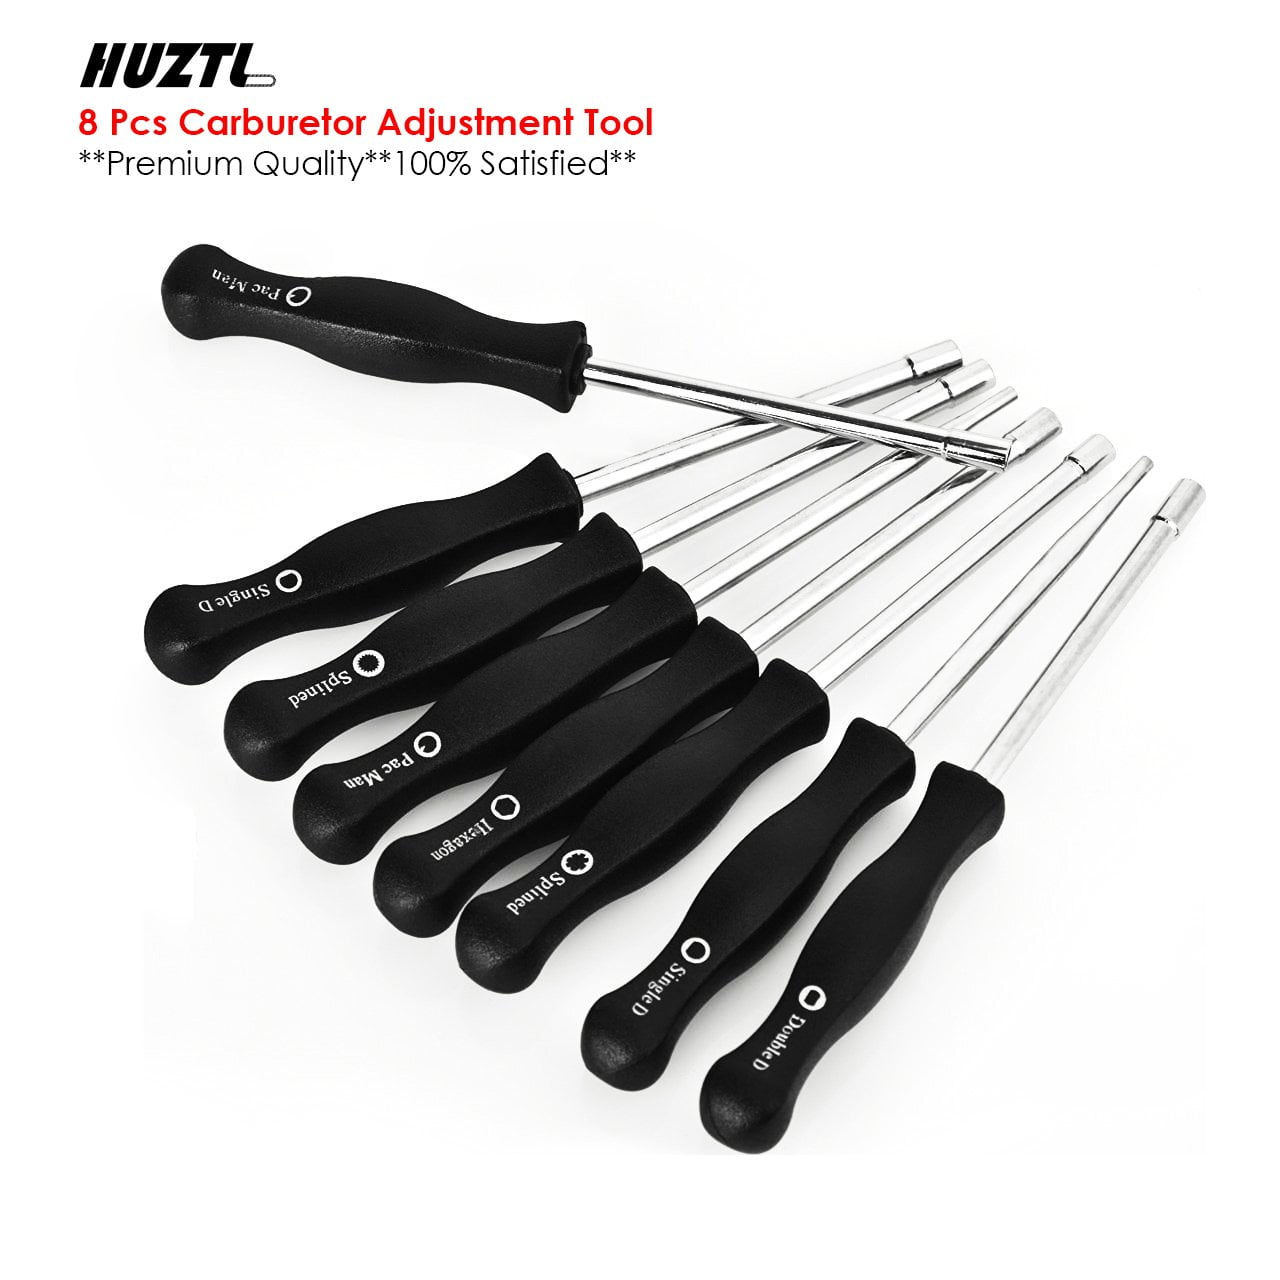 YunZyun Screwdriver 8 Pcs Adjustment Tool Kit Tune-Up Adjusting for Common 2 Cycle Engine Fits for Utilizes The Splined Adjustment Screws Multi 